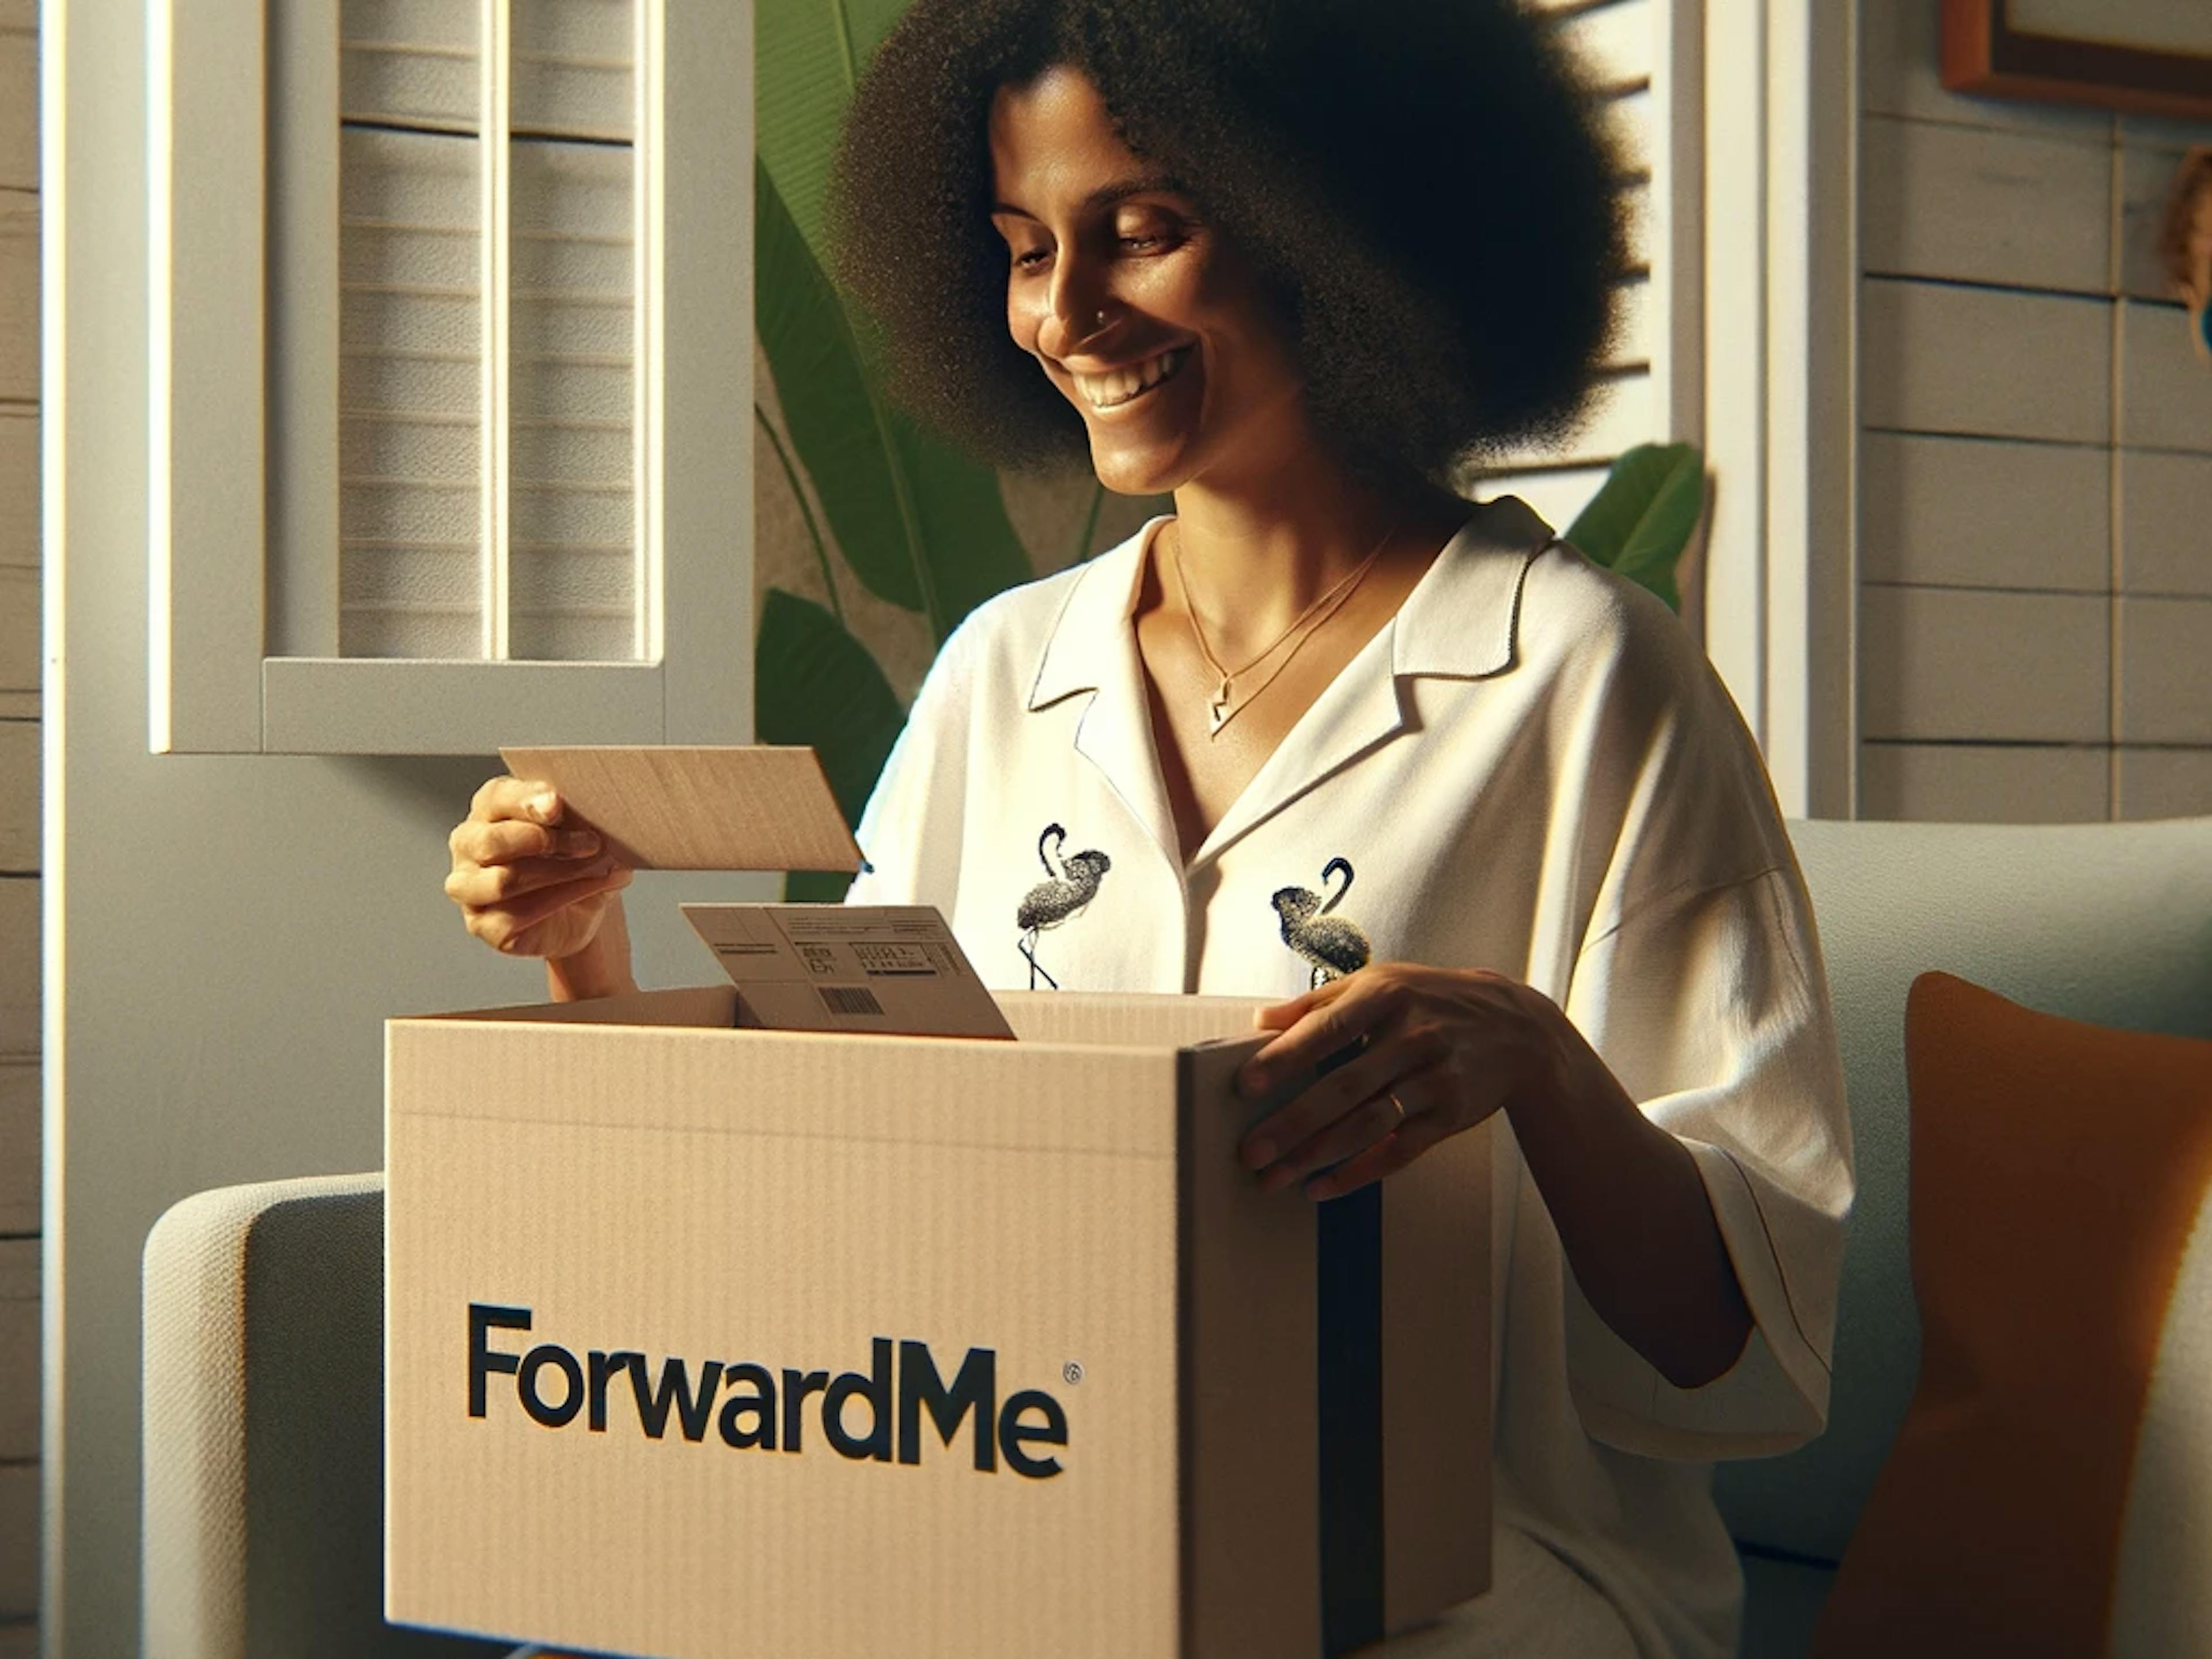 A package shipped with Forwardme being opened by a Brazilian woman.